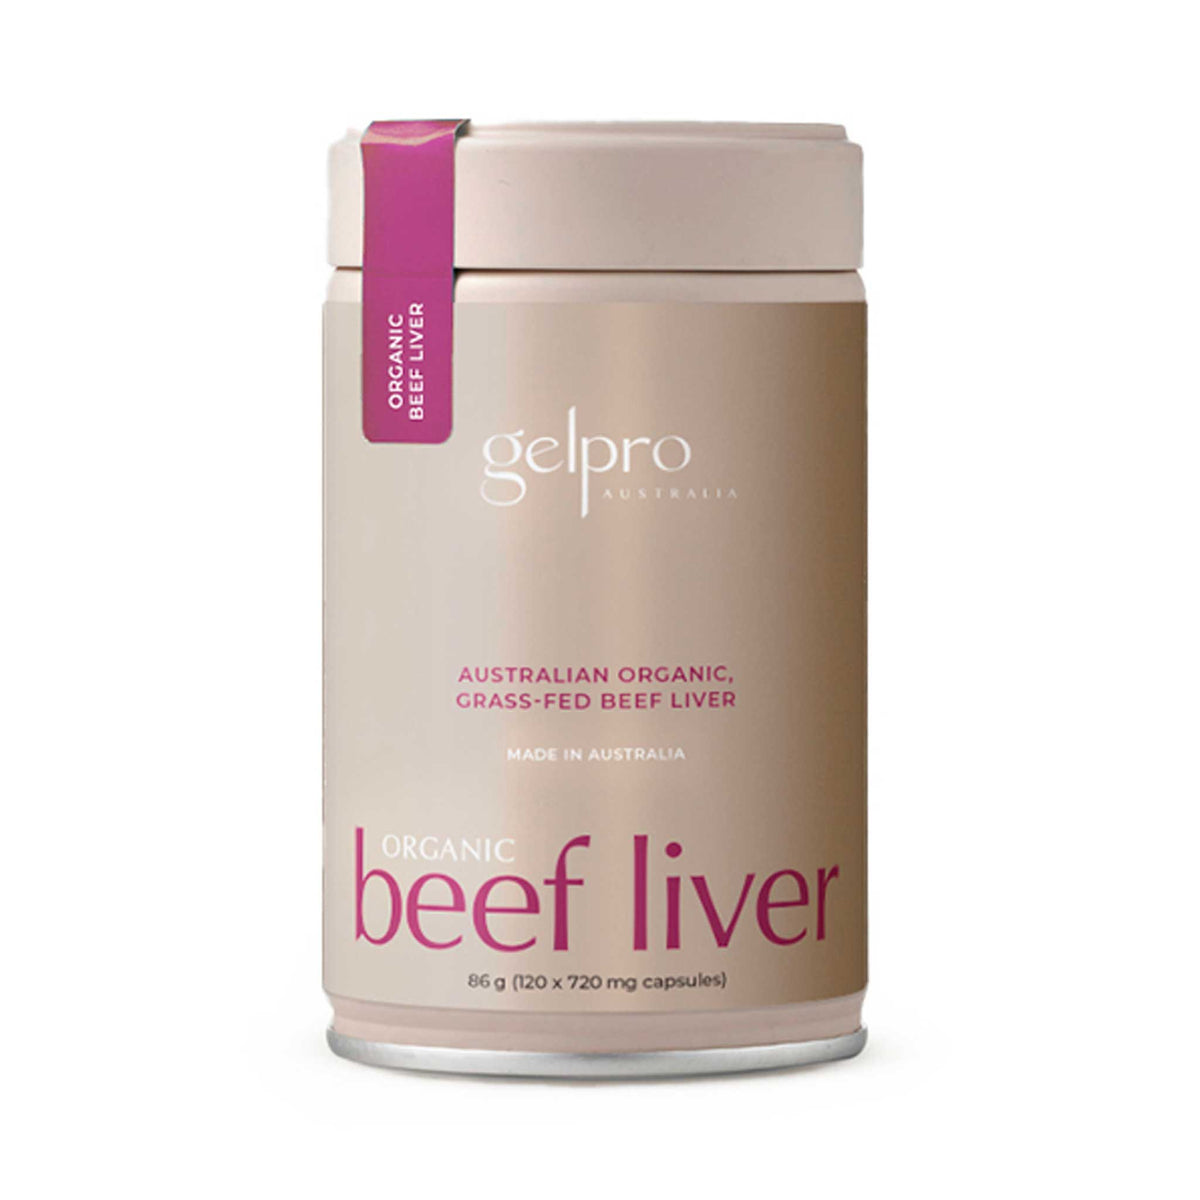 Organic Grass-Fed Beef Liver - 120 capsules